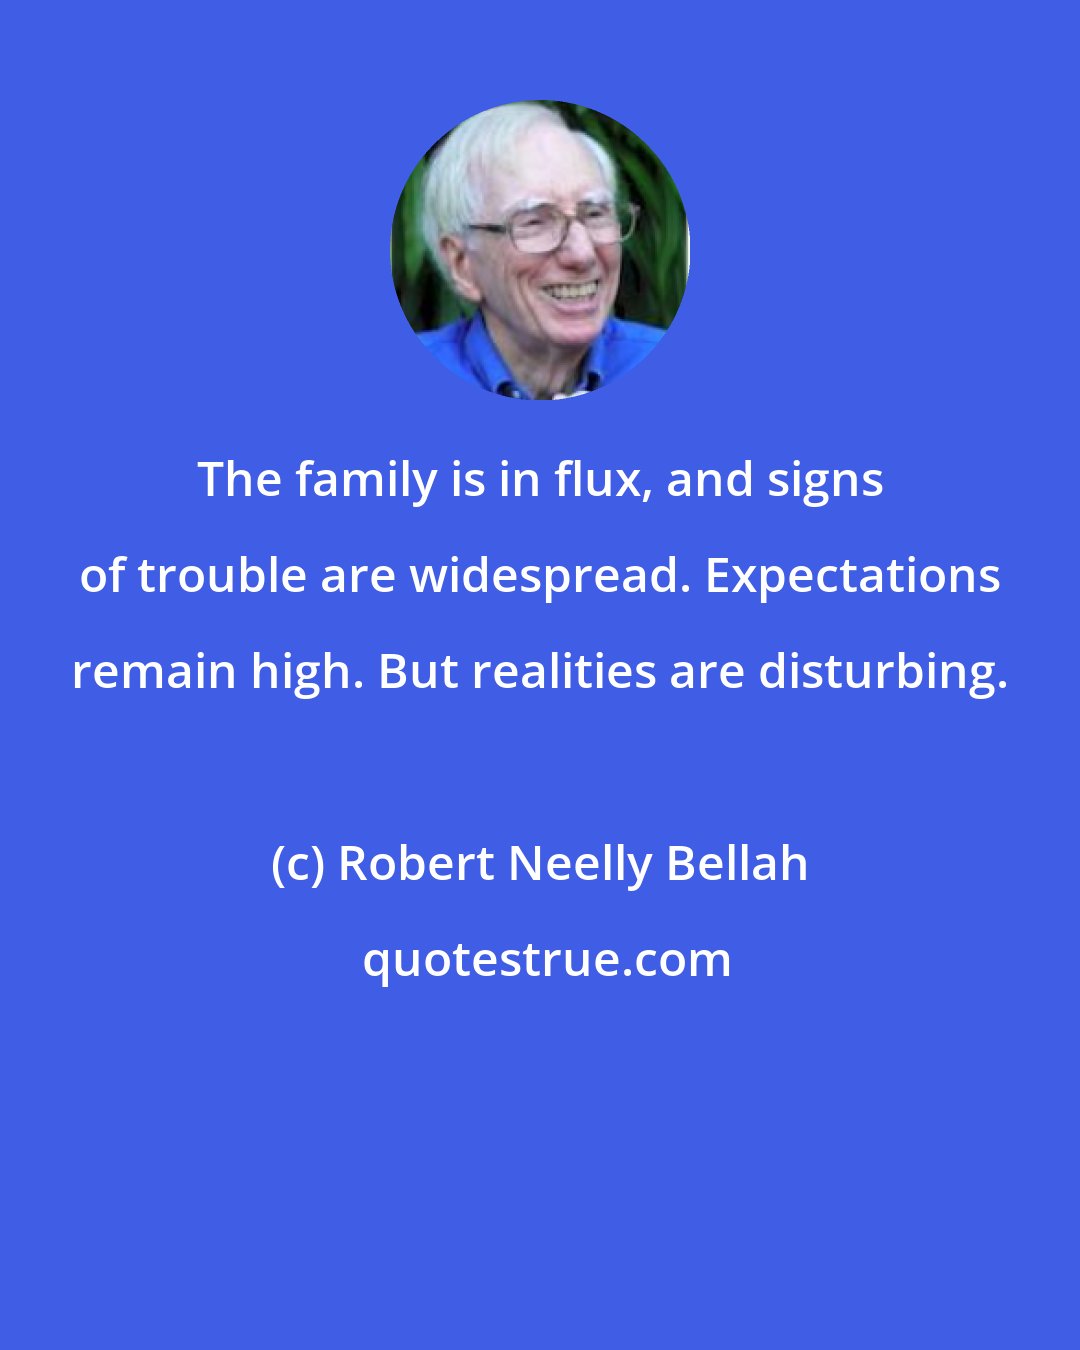 Robert Neelly Bellah: The family is in flux, and signs of trouble are widespread. Expectations remain high. But realities are disturbing.